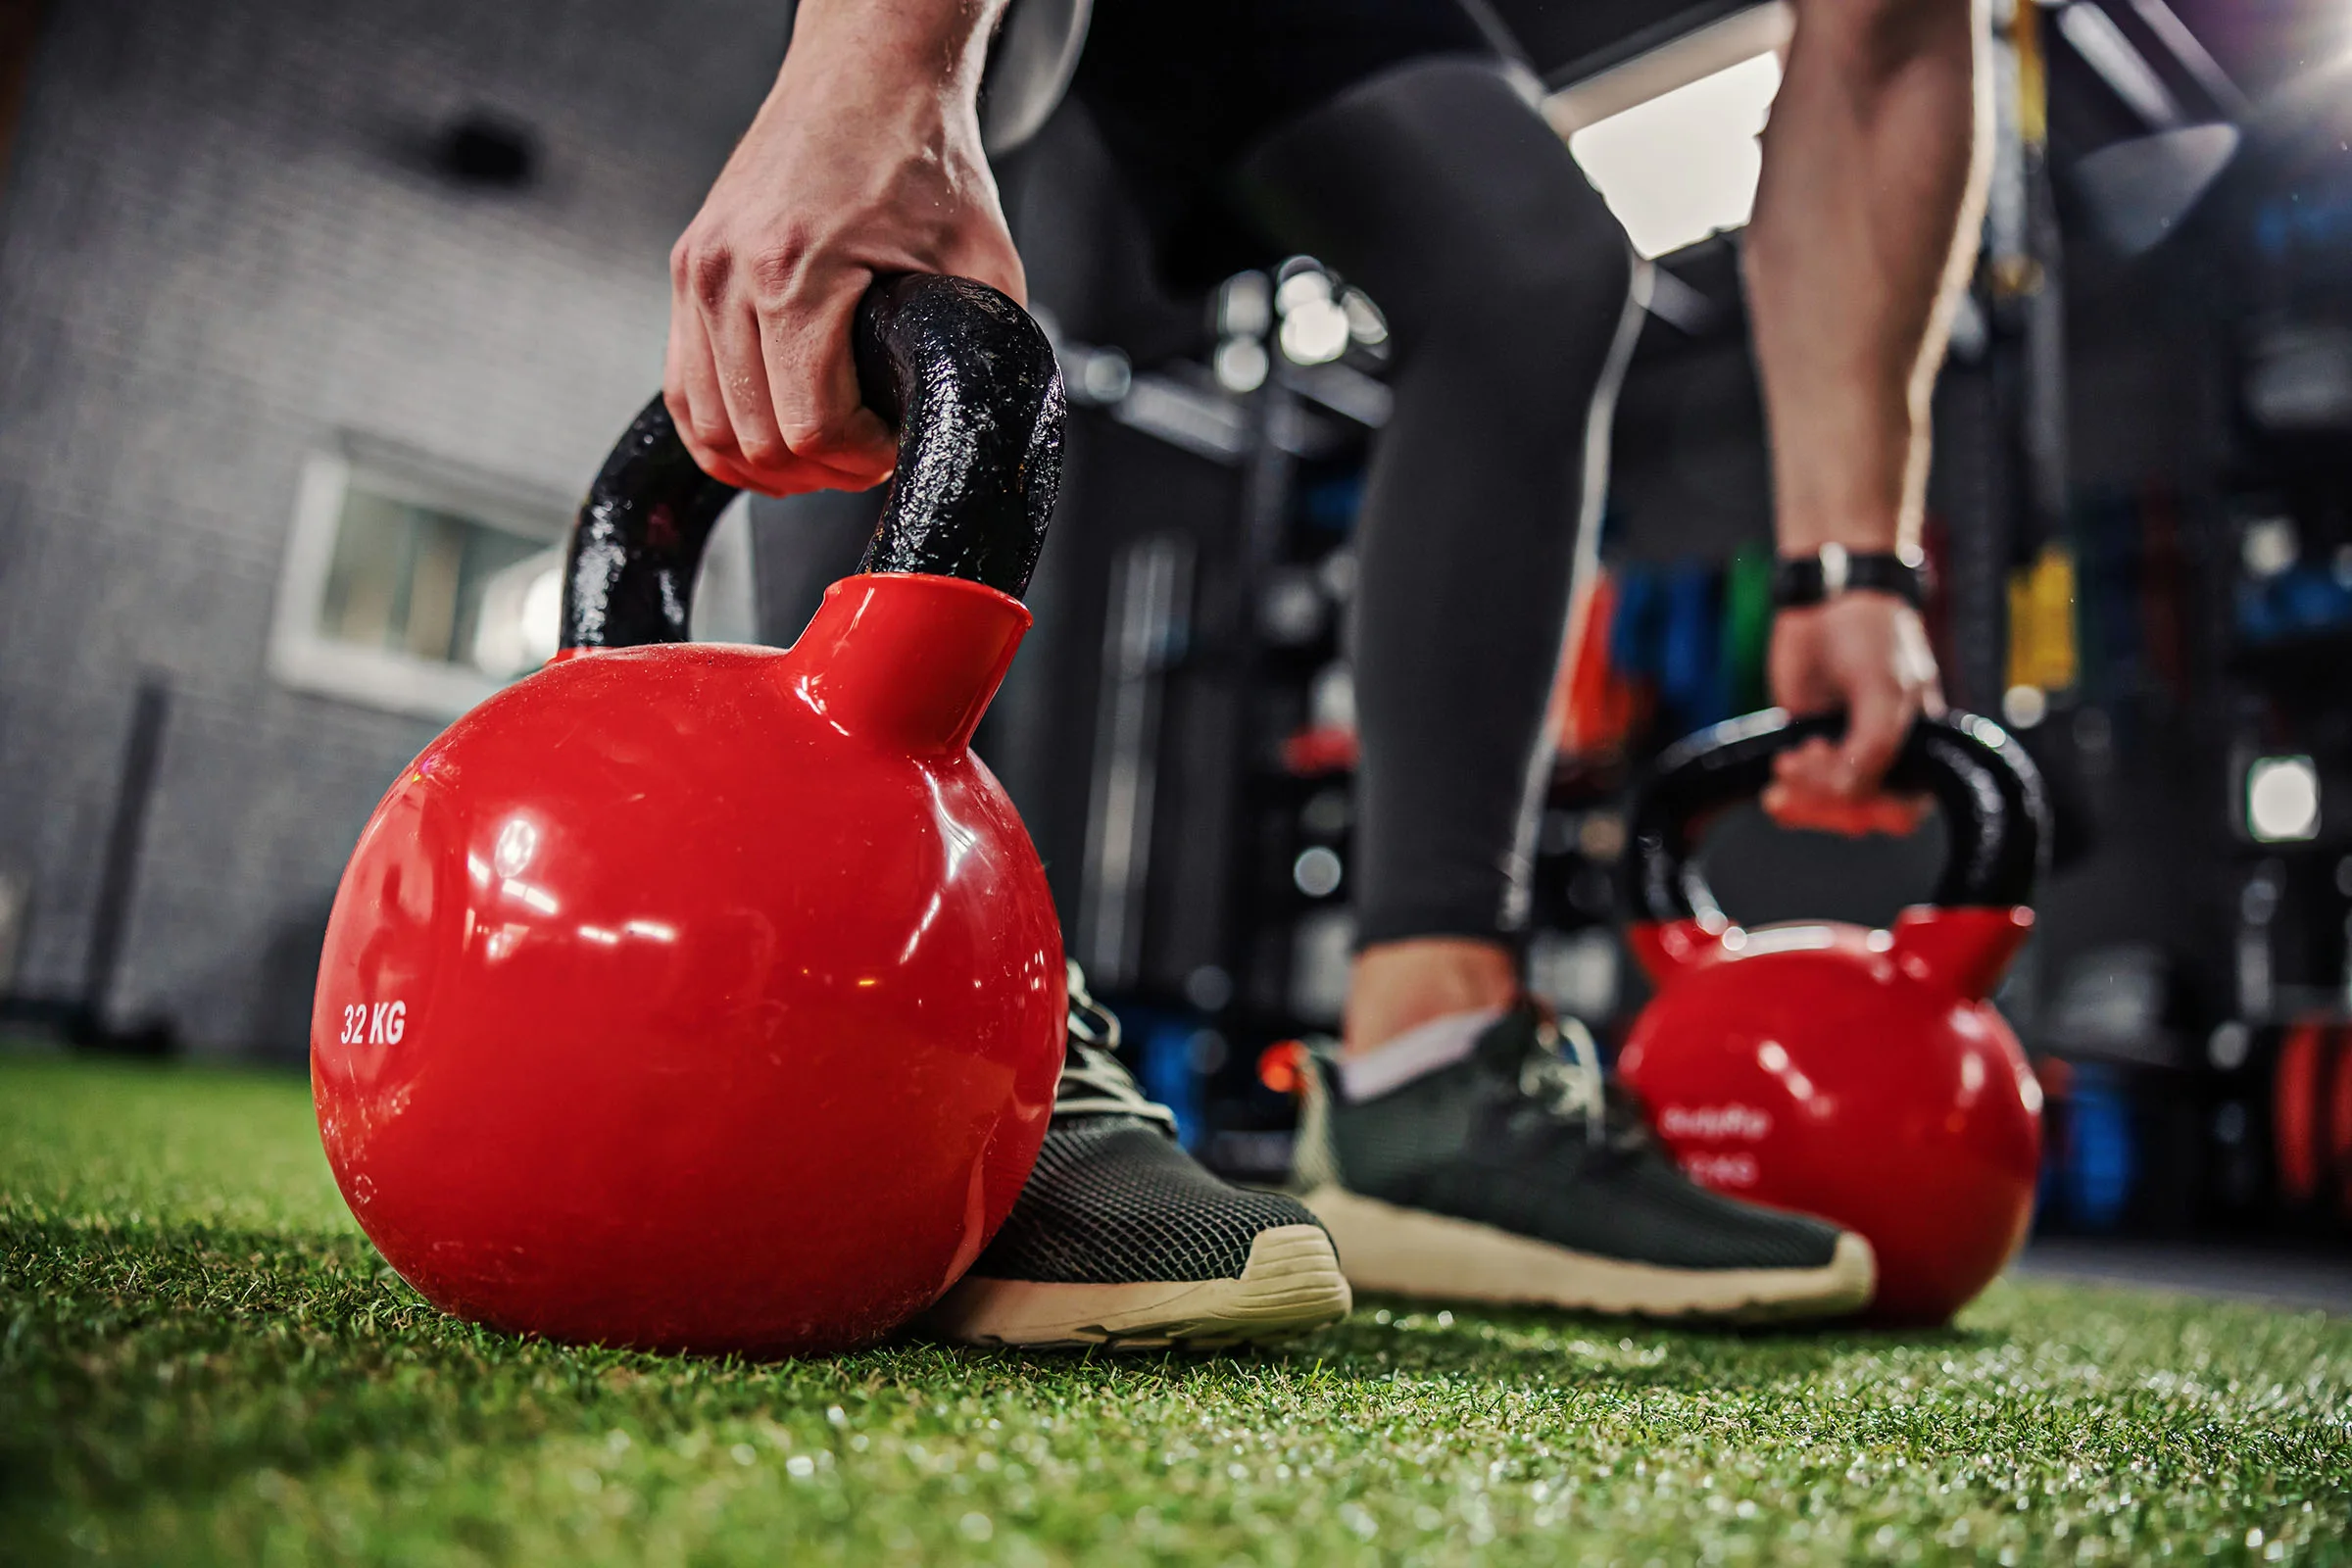 Kettle bells in focus. Two masculine strong arms take the sports equipment for exercising grip strength in both arms and prepare to lift weights. Two red kettle bells on green artificial grass indoor modern gym